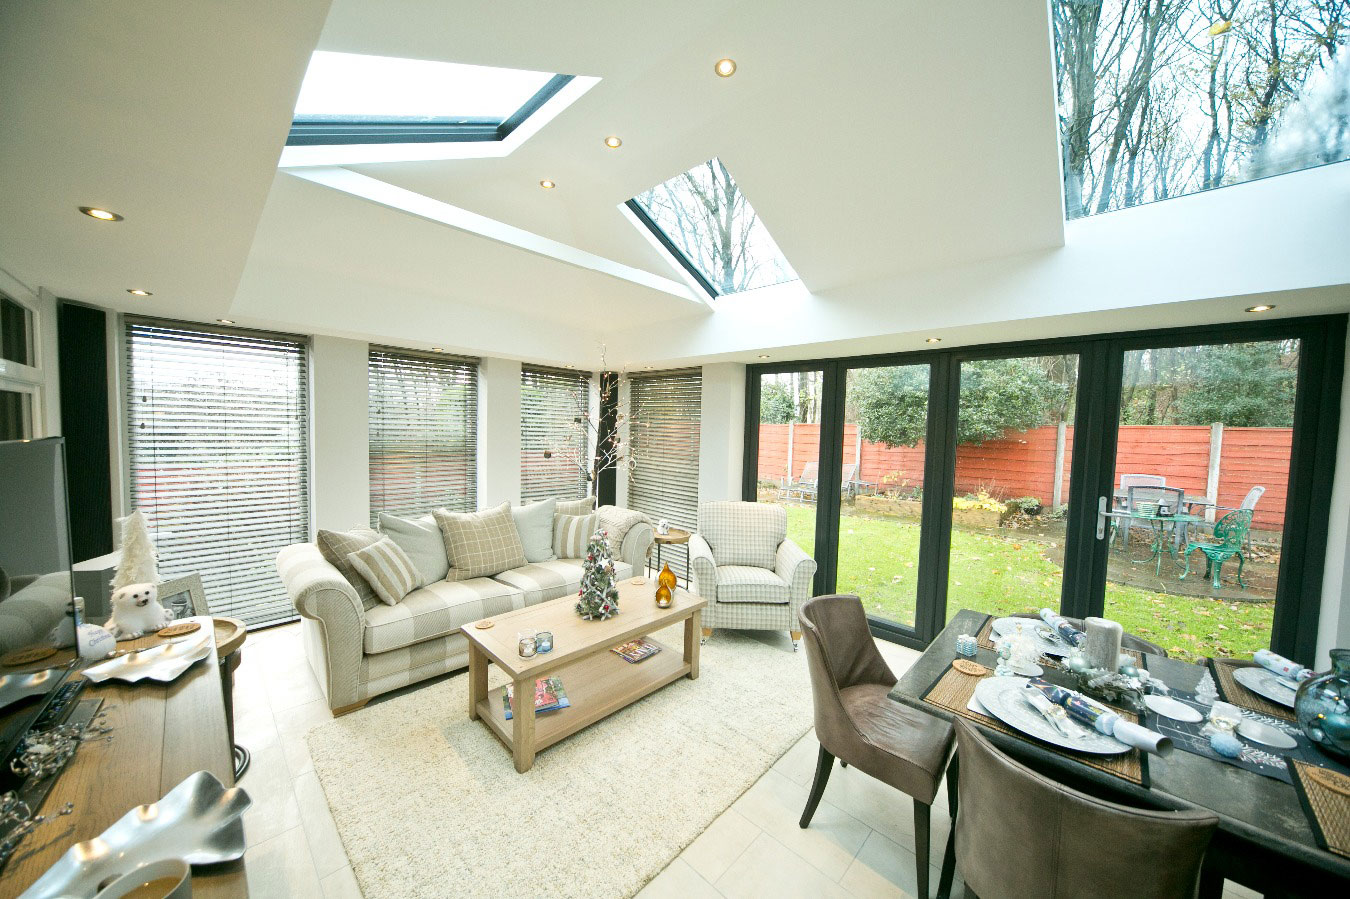 Marlow Best Flat Rooflight Prices